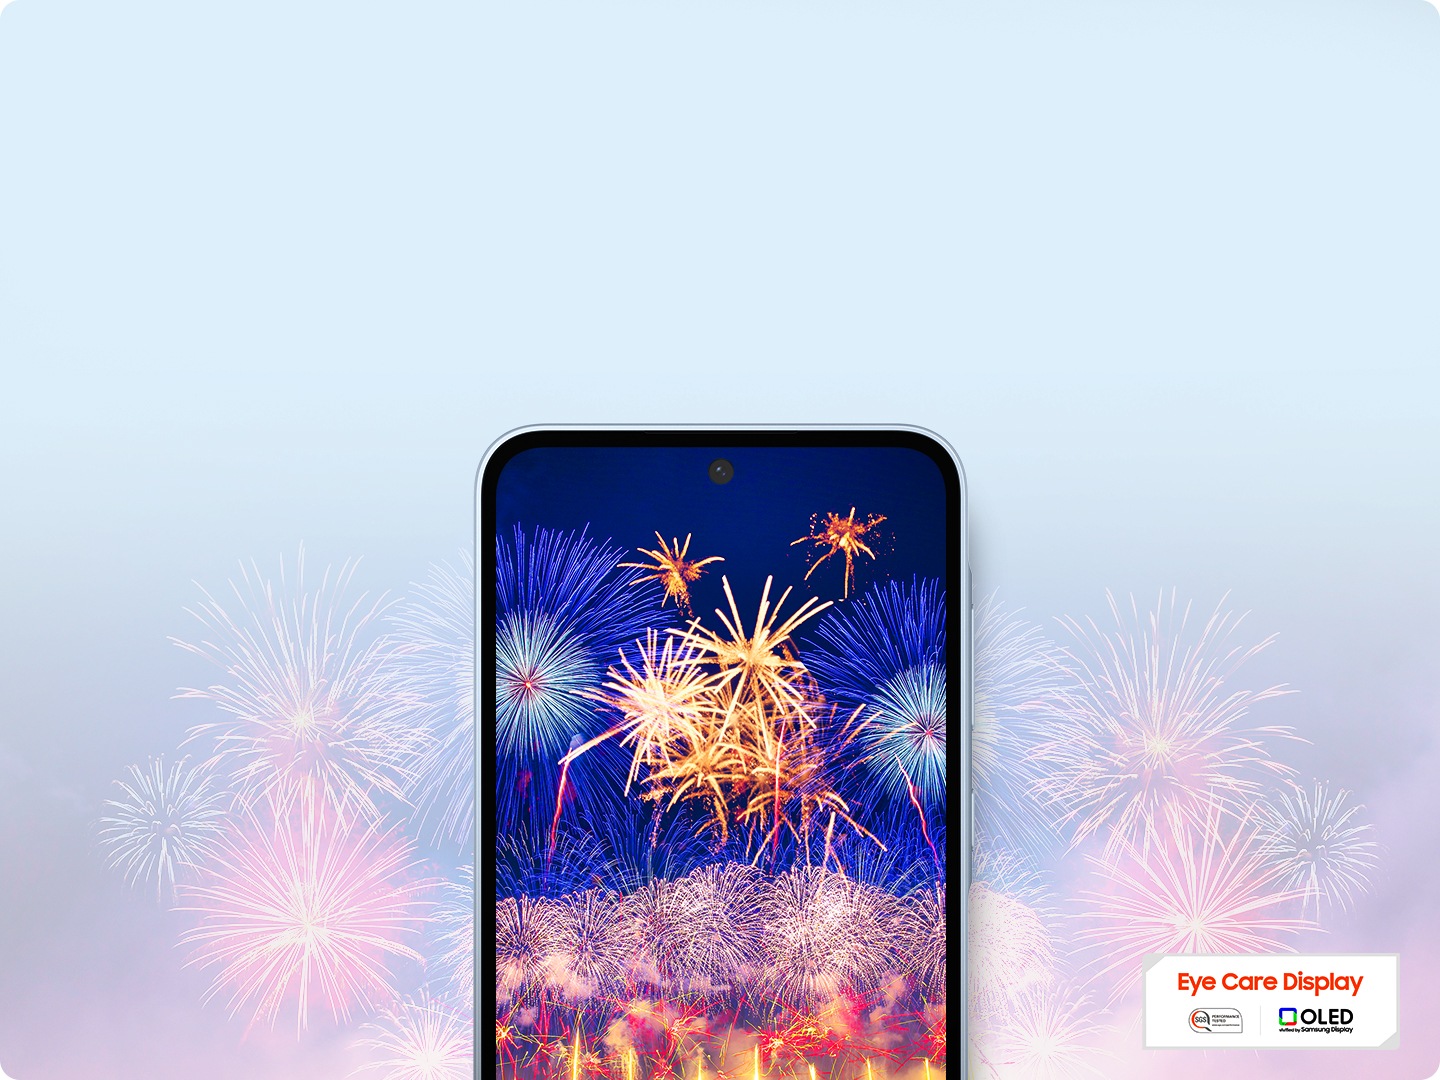 A smartphone showcasing a vibrant display of fireworks on the screen. With an 'Eye Care Display' and OLED technology logo.